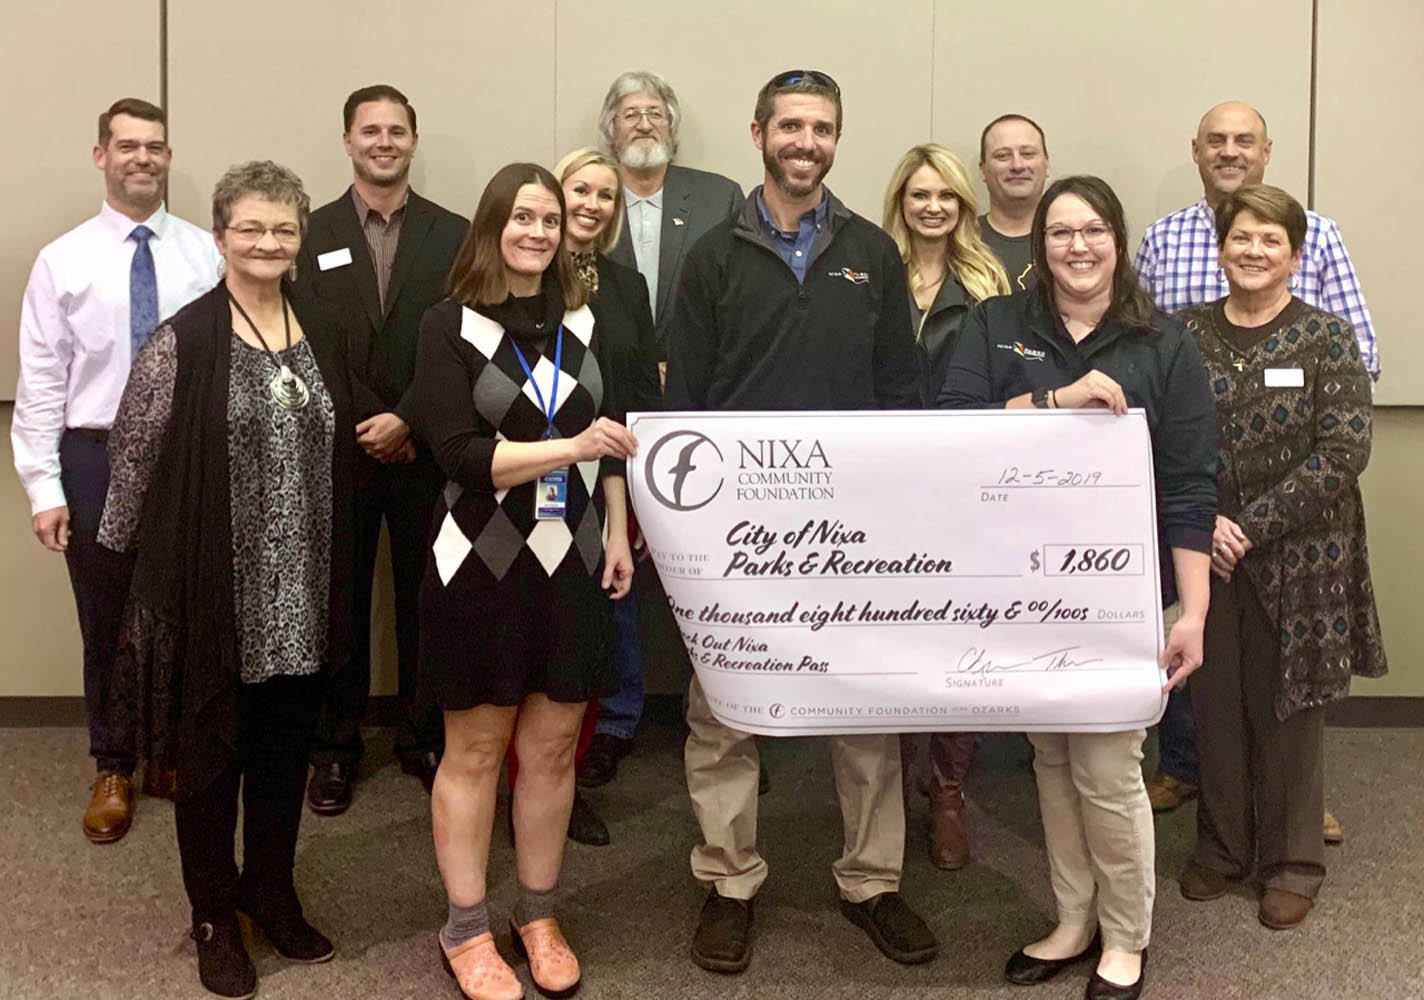 PARKS & REC
Officials with the Nixa Community Foundation on Dec. 5, 2019, present an $1,860 check to Nixa Parks & Recreation staff to fund a new program. In partnership with the Christian County Library, card holders will be able to obtain pool and fitness center passes at The X Center in 2020 and 2021. The foundation also distributed $2,300 to the Nixa Police Department for its Cops Connecting with Kids program and $1,950 for the city to purchase weather radios to give to the elderly.